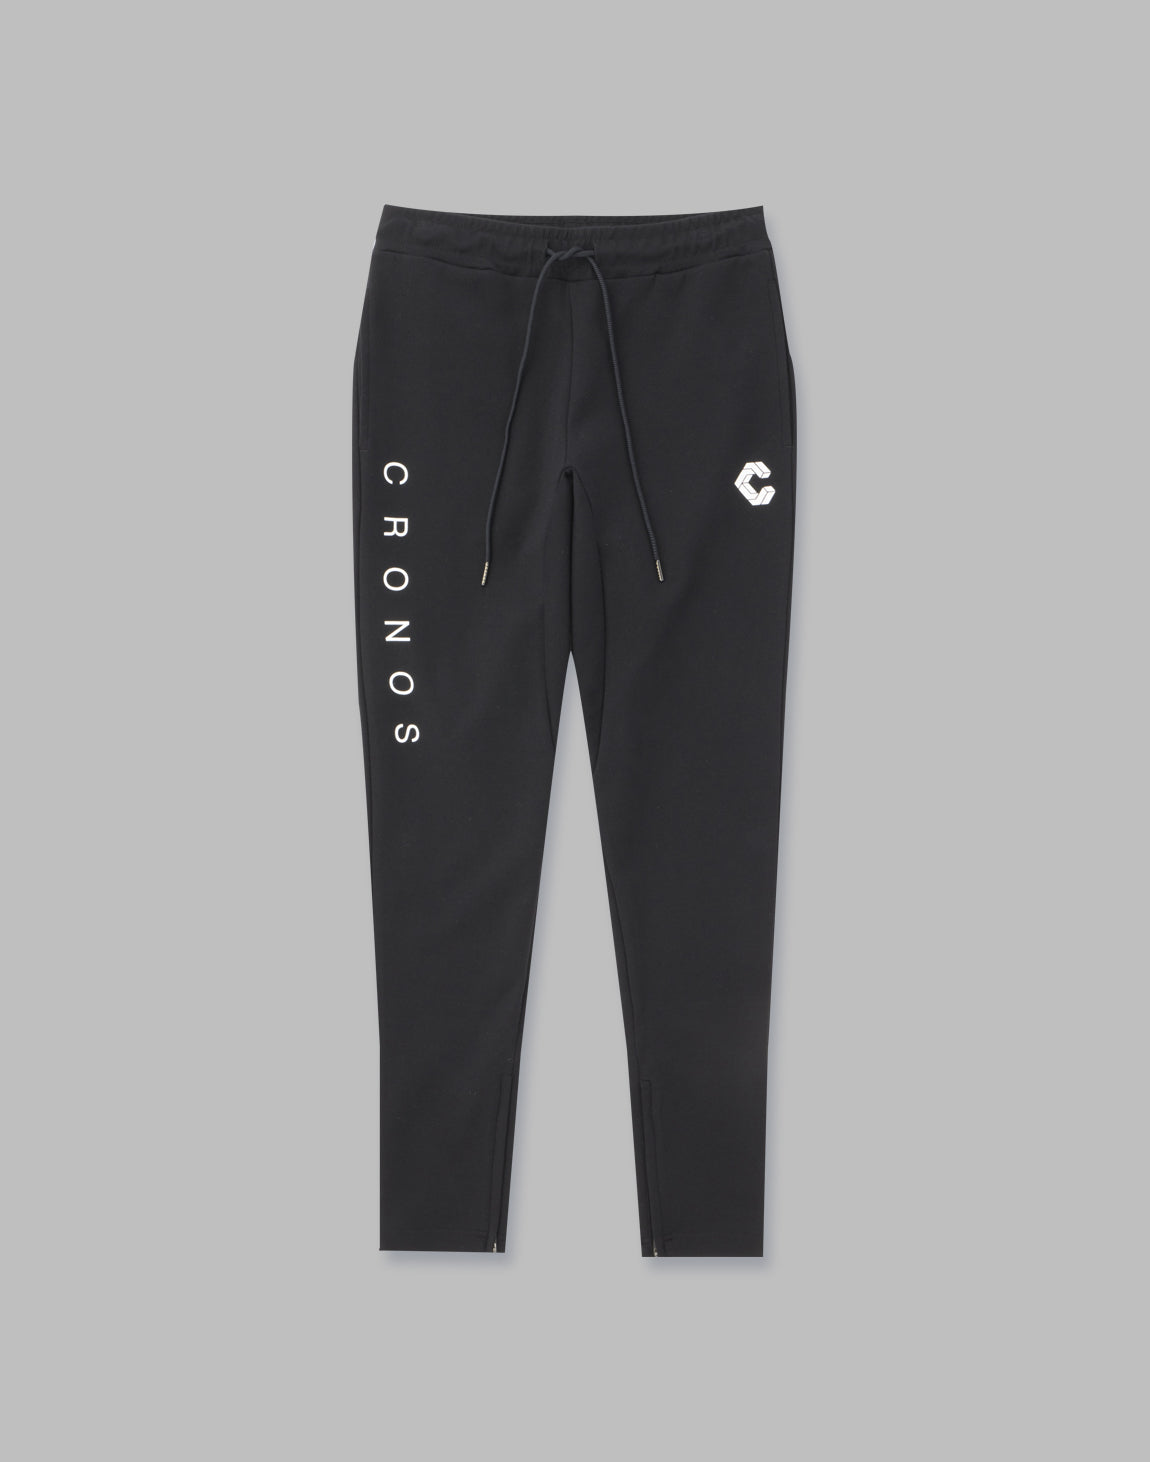 CRONOS MODE STRETCH PANTS – クロノス CRONOS Official